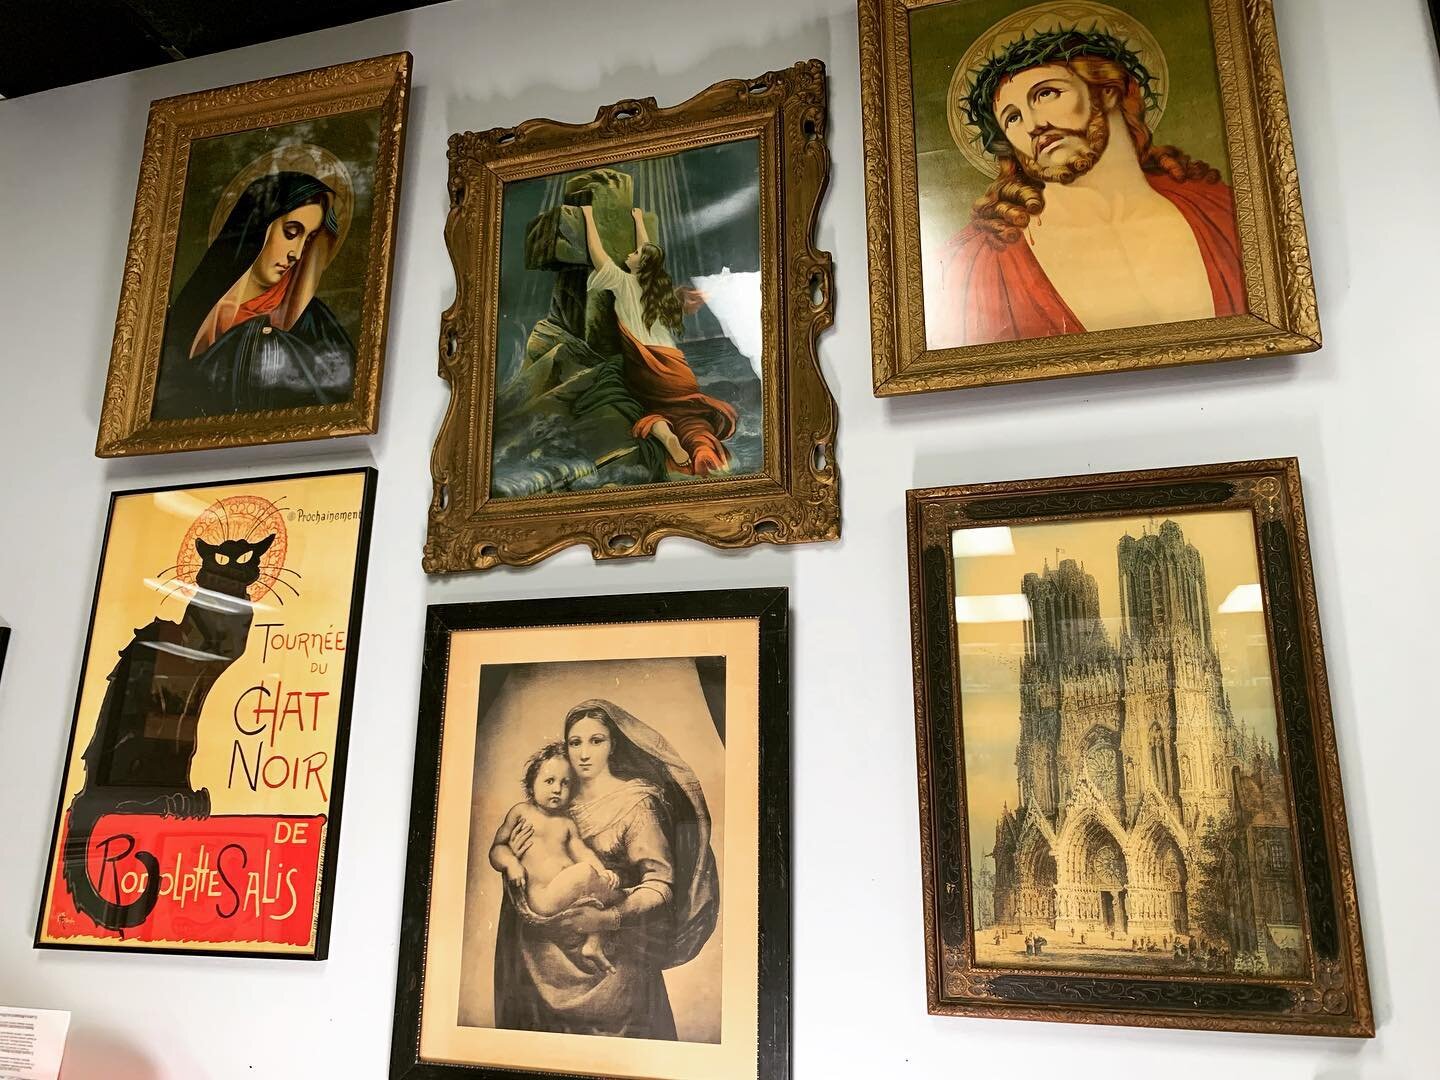 Some of my favorite consignment store finds. #consignment #oldassartwork #rockofages #madonnadisansisto #madonna #chatnoir #mary #jesus #religiousart #coolshit #vintageframes #vintagelithograph